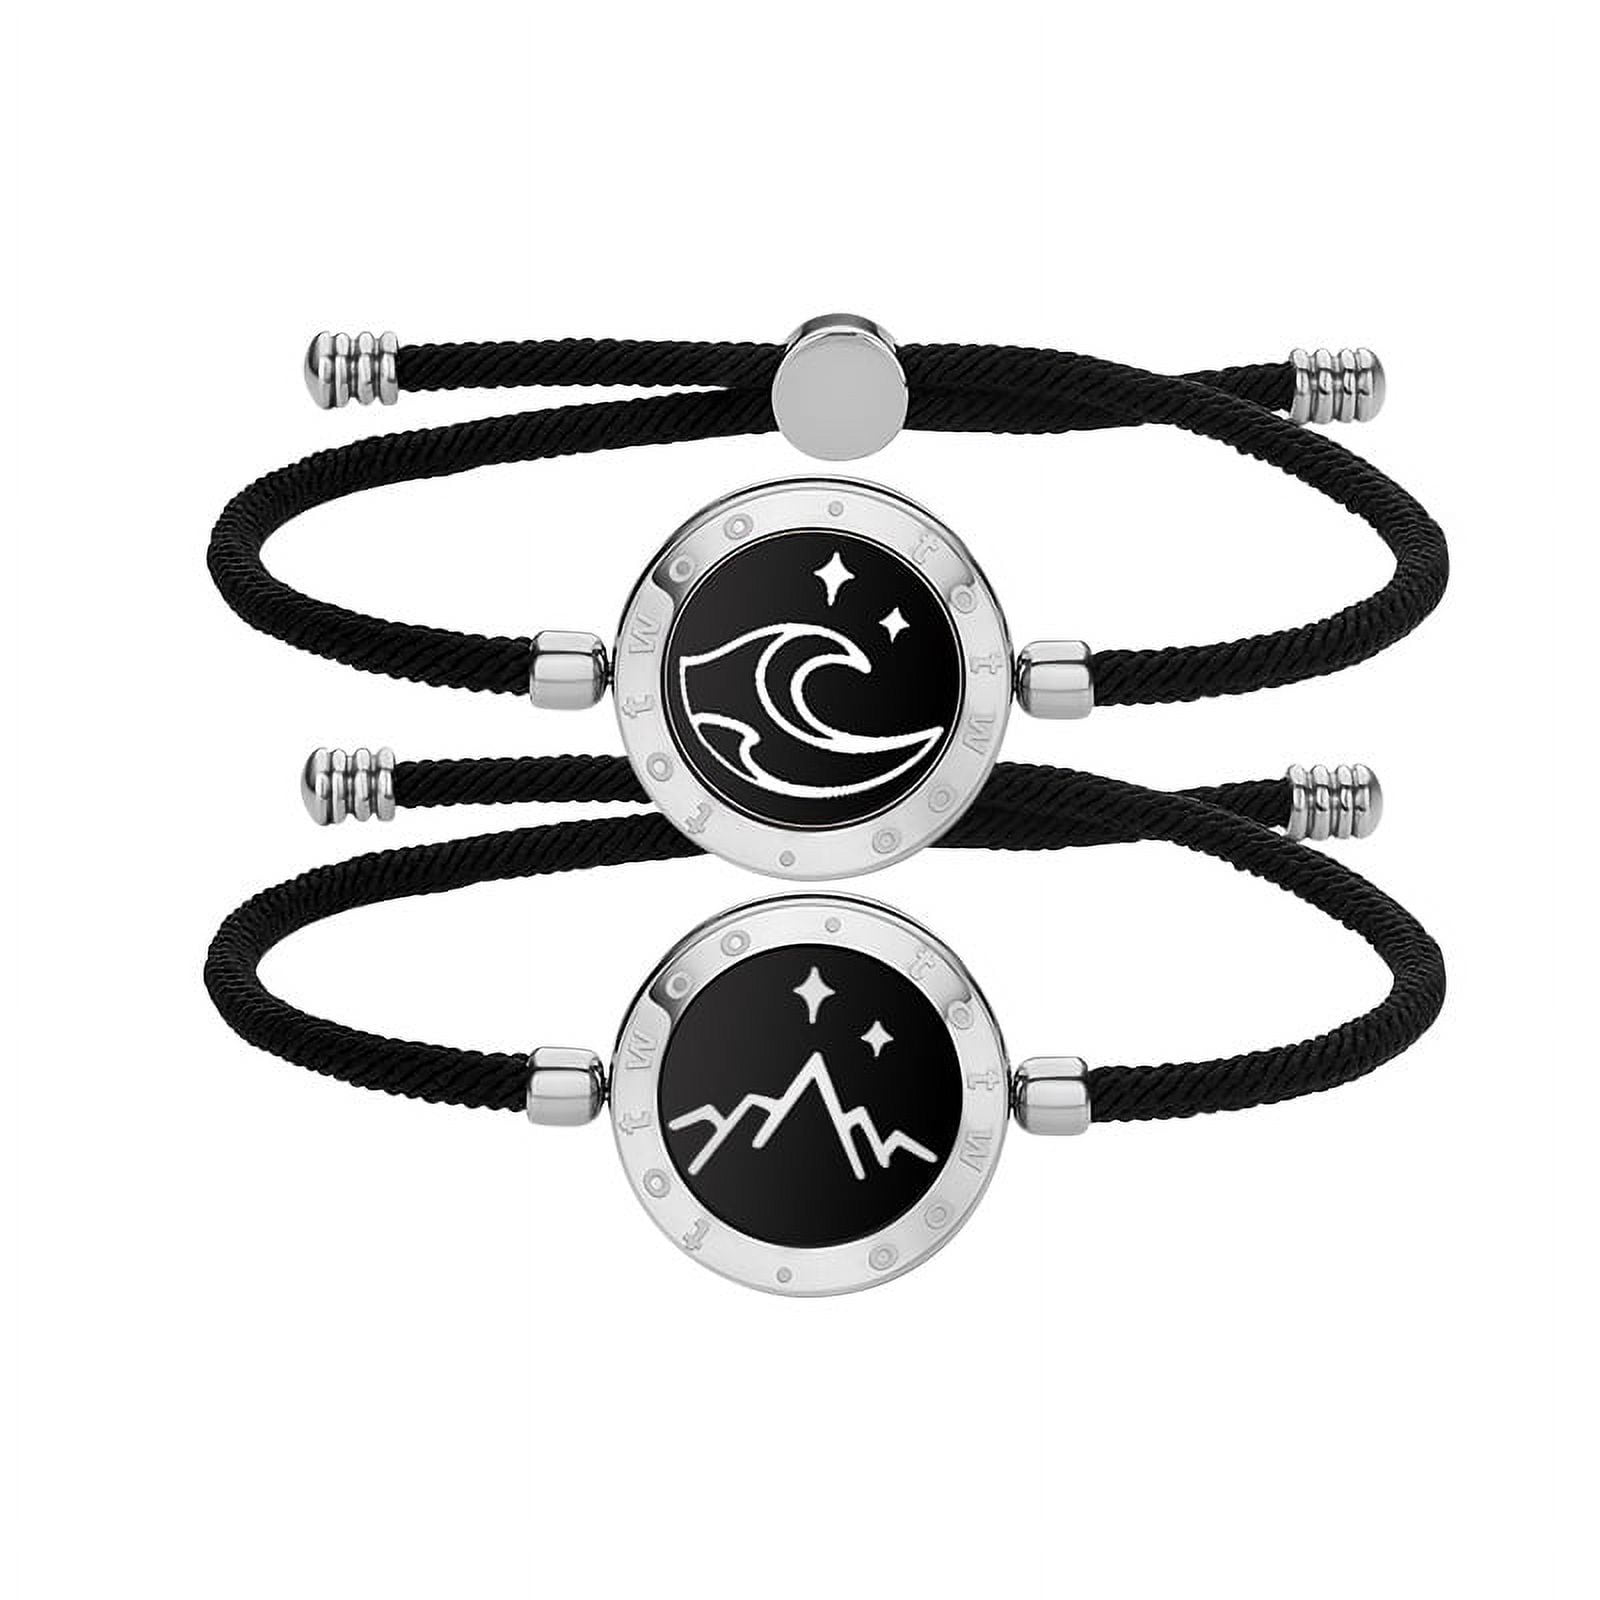 Totwoo long distance touch Bracelets for Couples Long Distance relationship  gifts light up&Vibrate Smart Jewelry sets